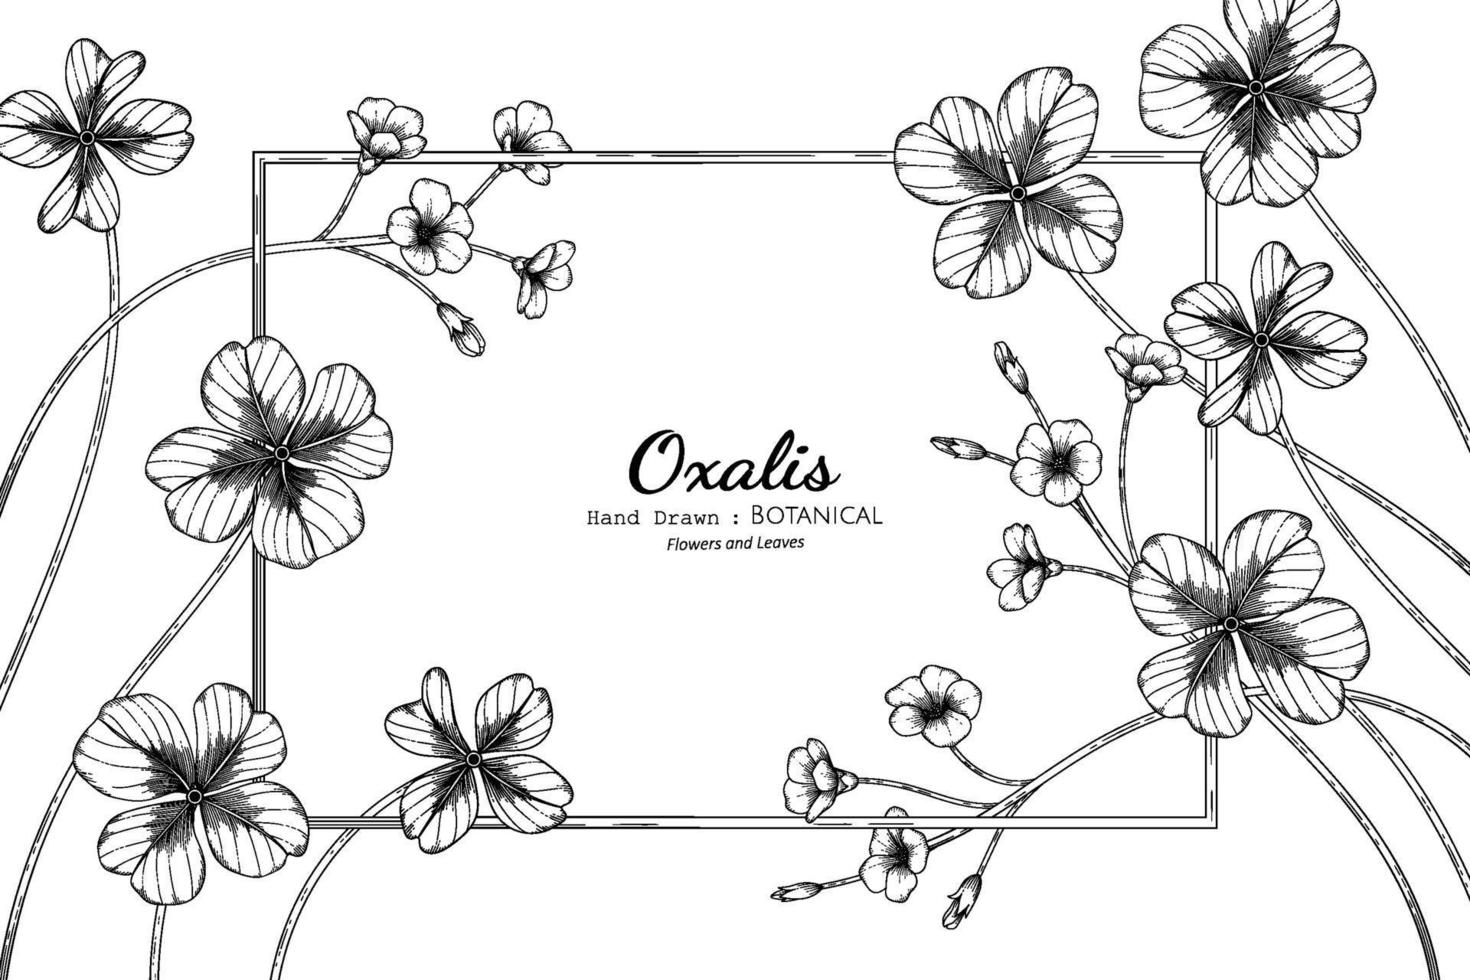 Oxalis flower and leaf hand drawn botanical illustration with line art. vector